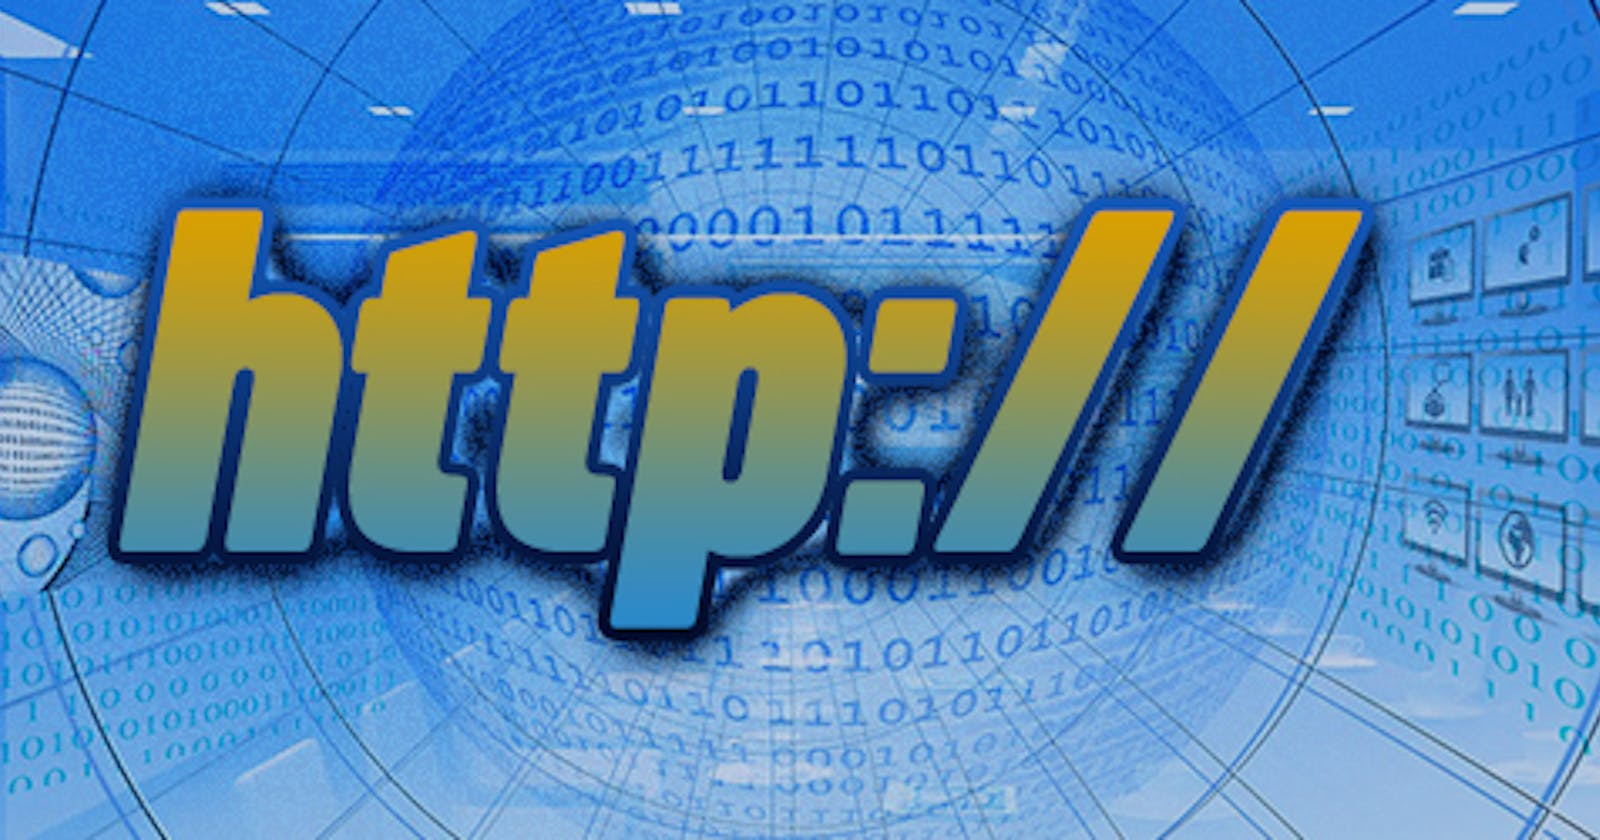 How Does HTTP Affect The Way We Use The Internet?